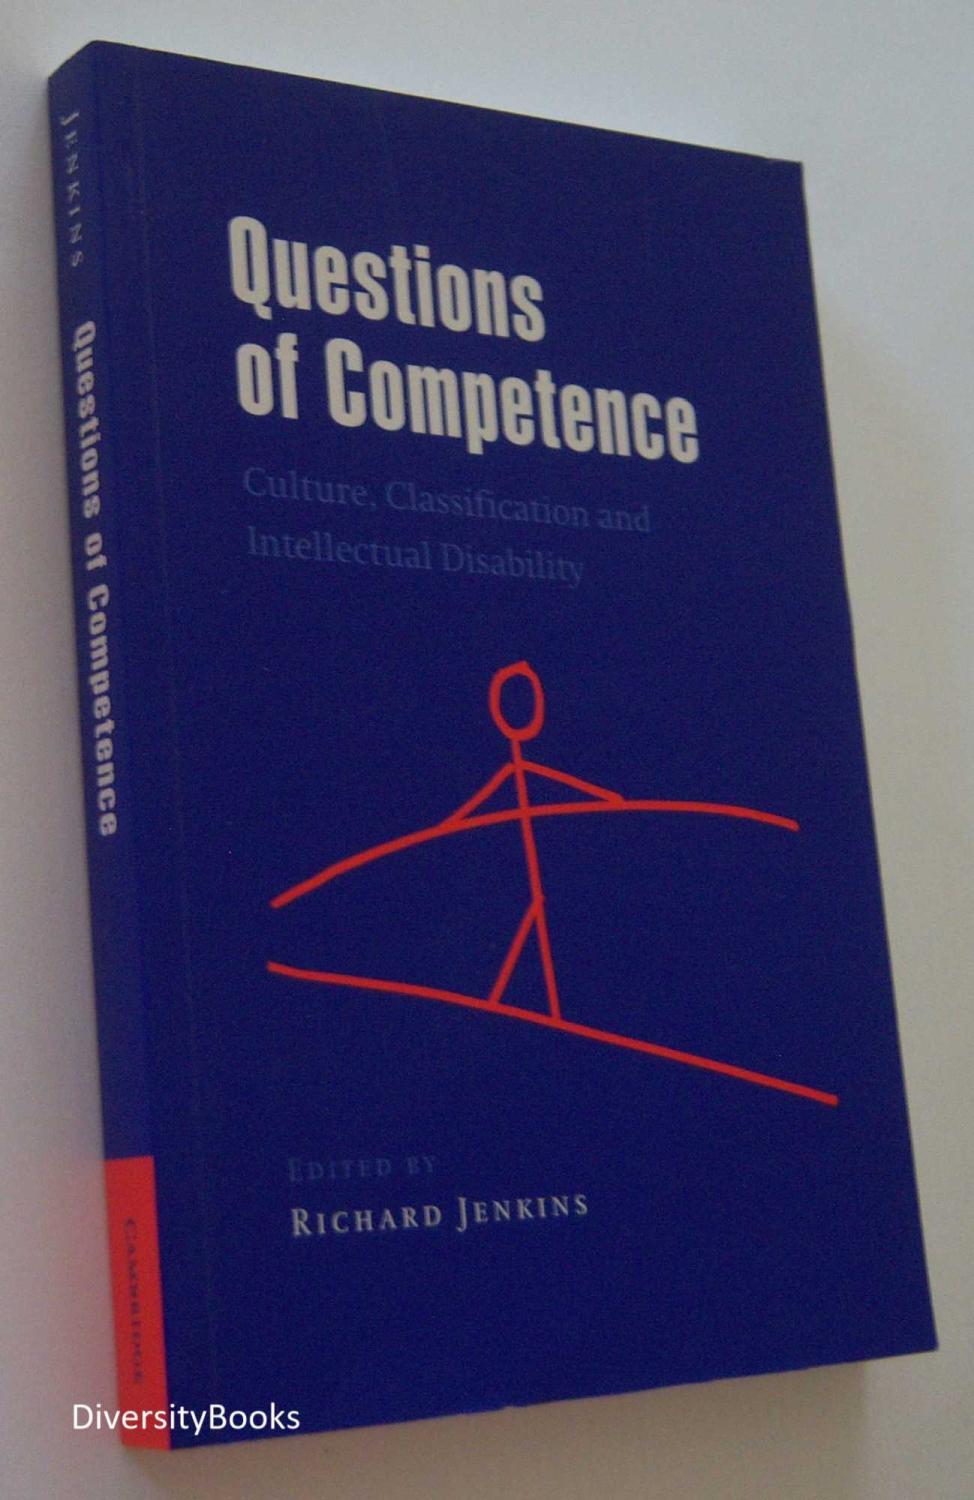 QUESTIONS OF COMPETENCE : Culture, Classification and Intellectual Disability - Jenkins, Richard (Edited by)